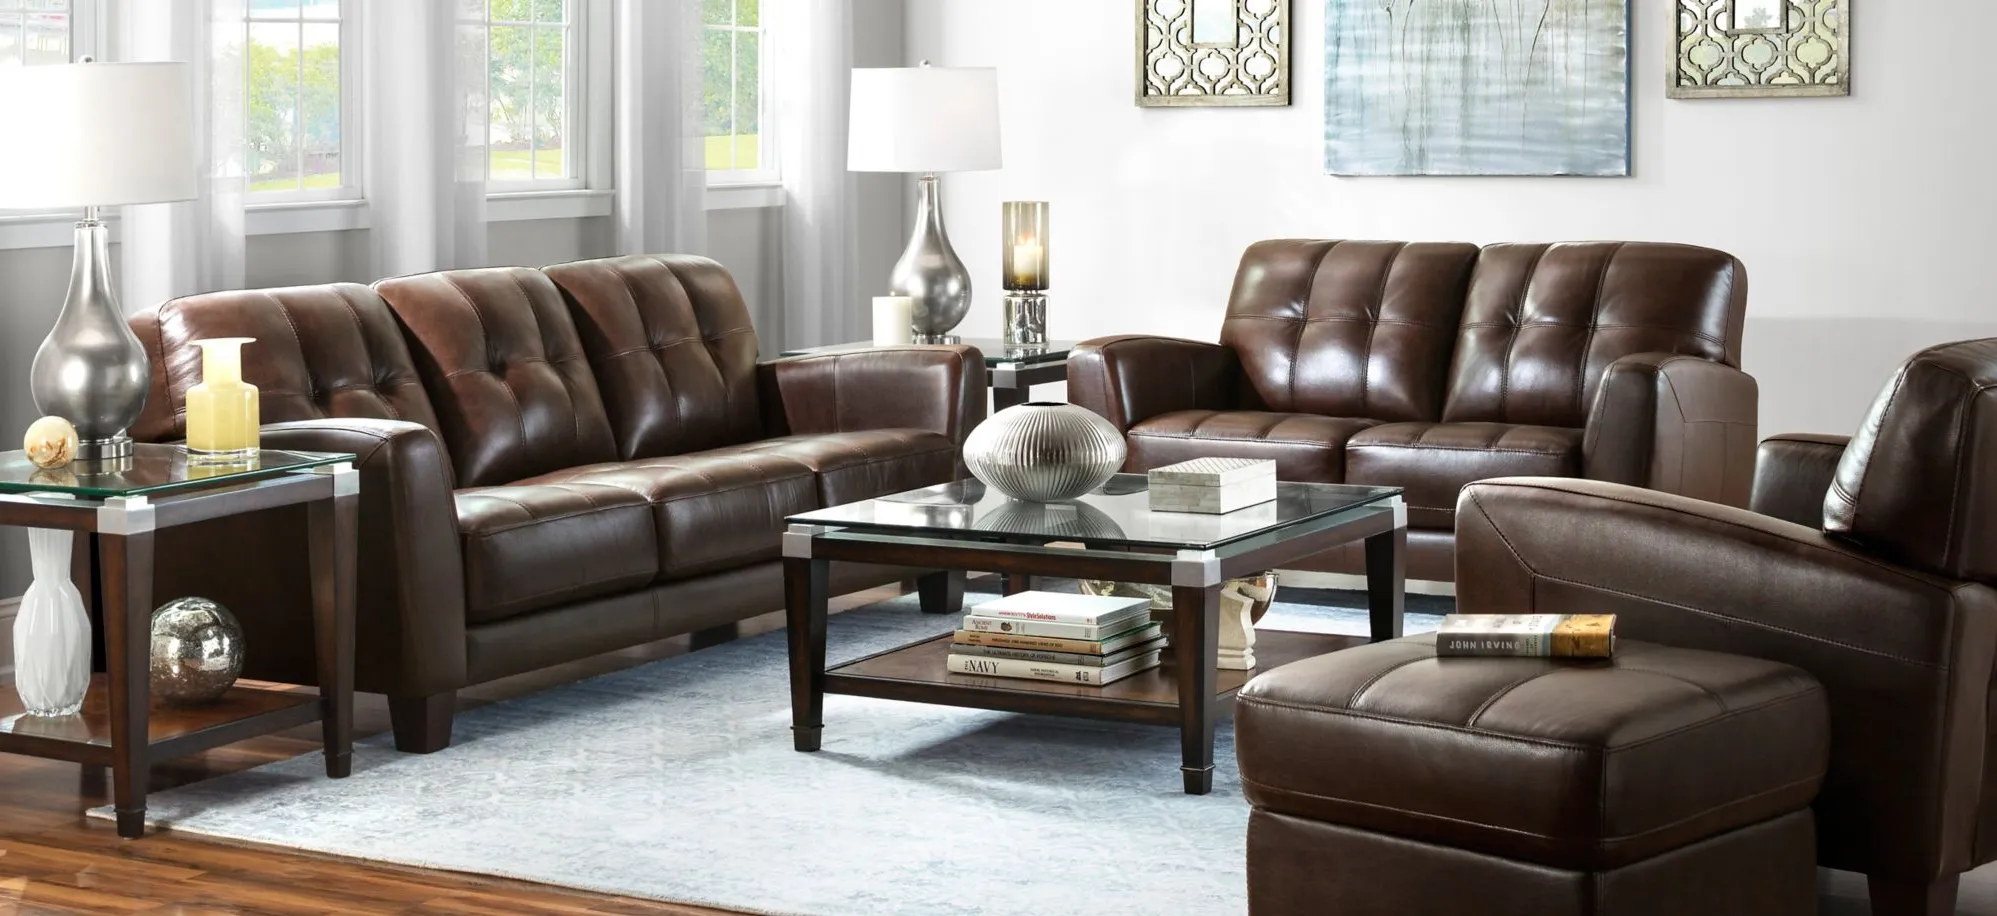 Gino Living Room Set in Classico Dark Brown by Bellanest